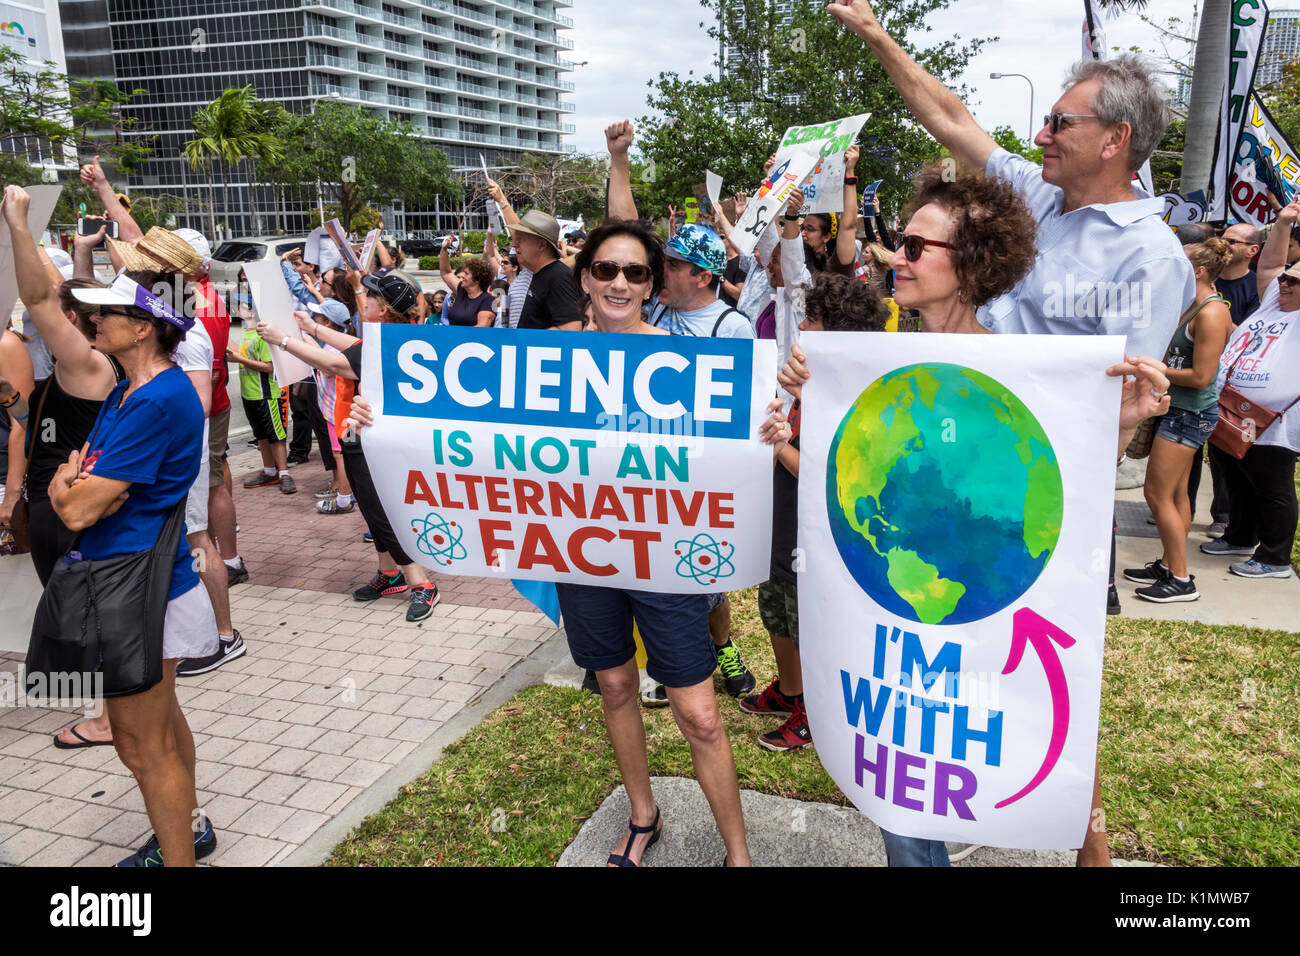 Miami Florida,Museum Park,March for Science,protest,rally,sign,protester,marching,posters,signs,woman female holding,teacher,FL170430150 Stock Photo